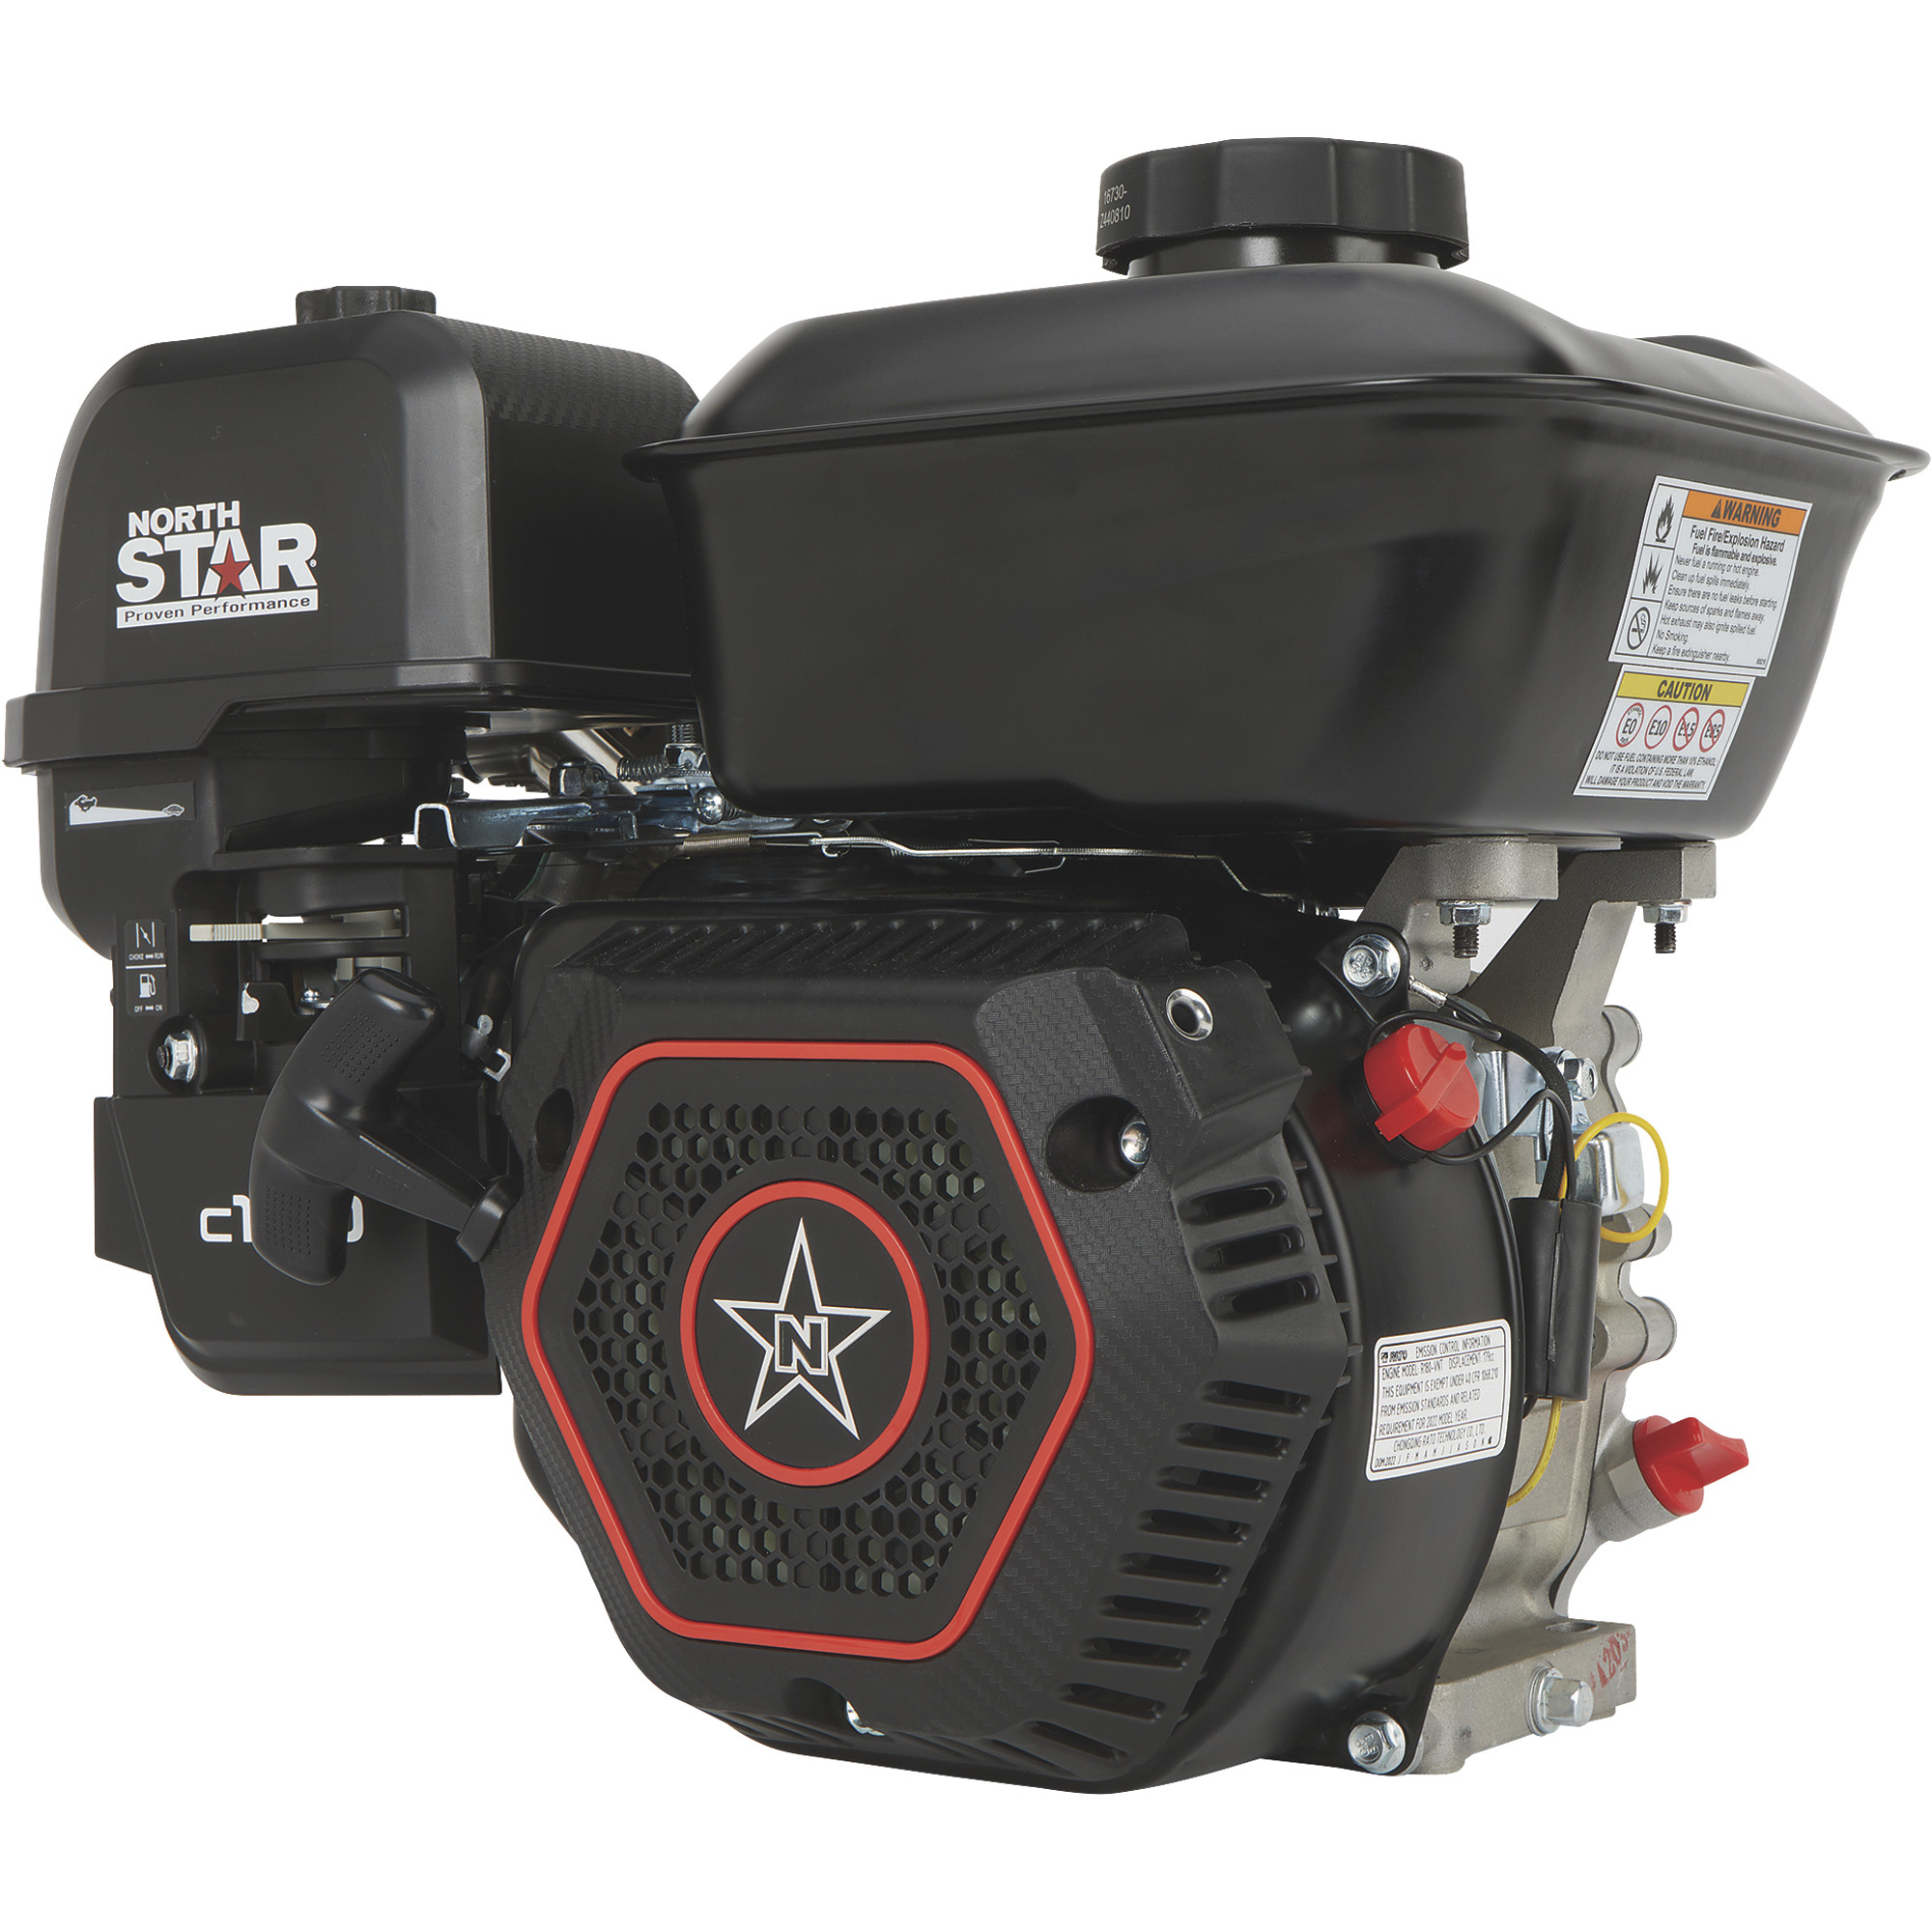 NorthStar c180 Horizontal OHV Engine with Recoil Start â 179cc, 3/4Inch x 2-7/16Inch Shaft